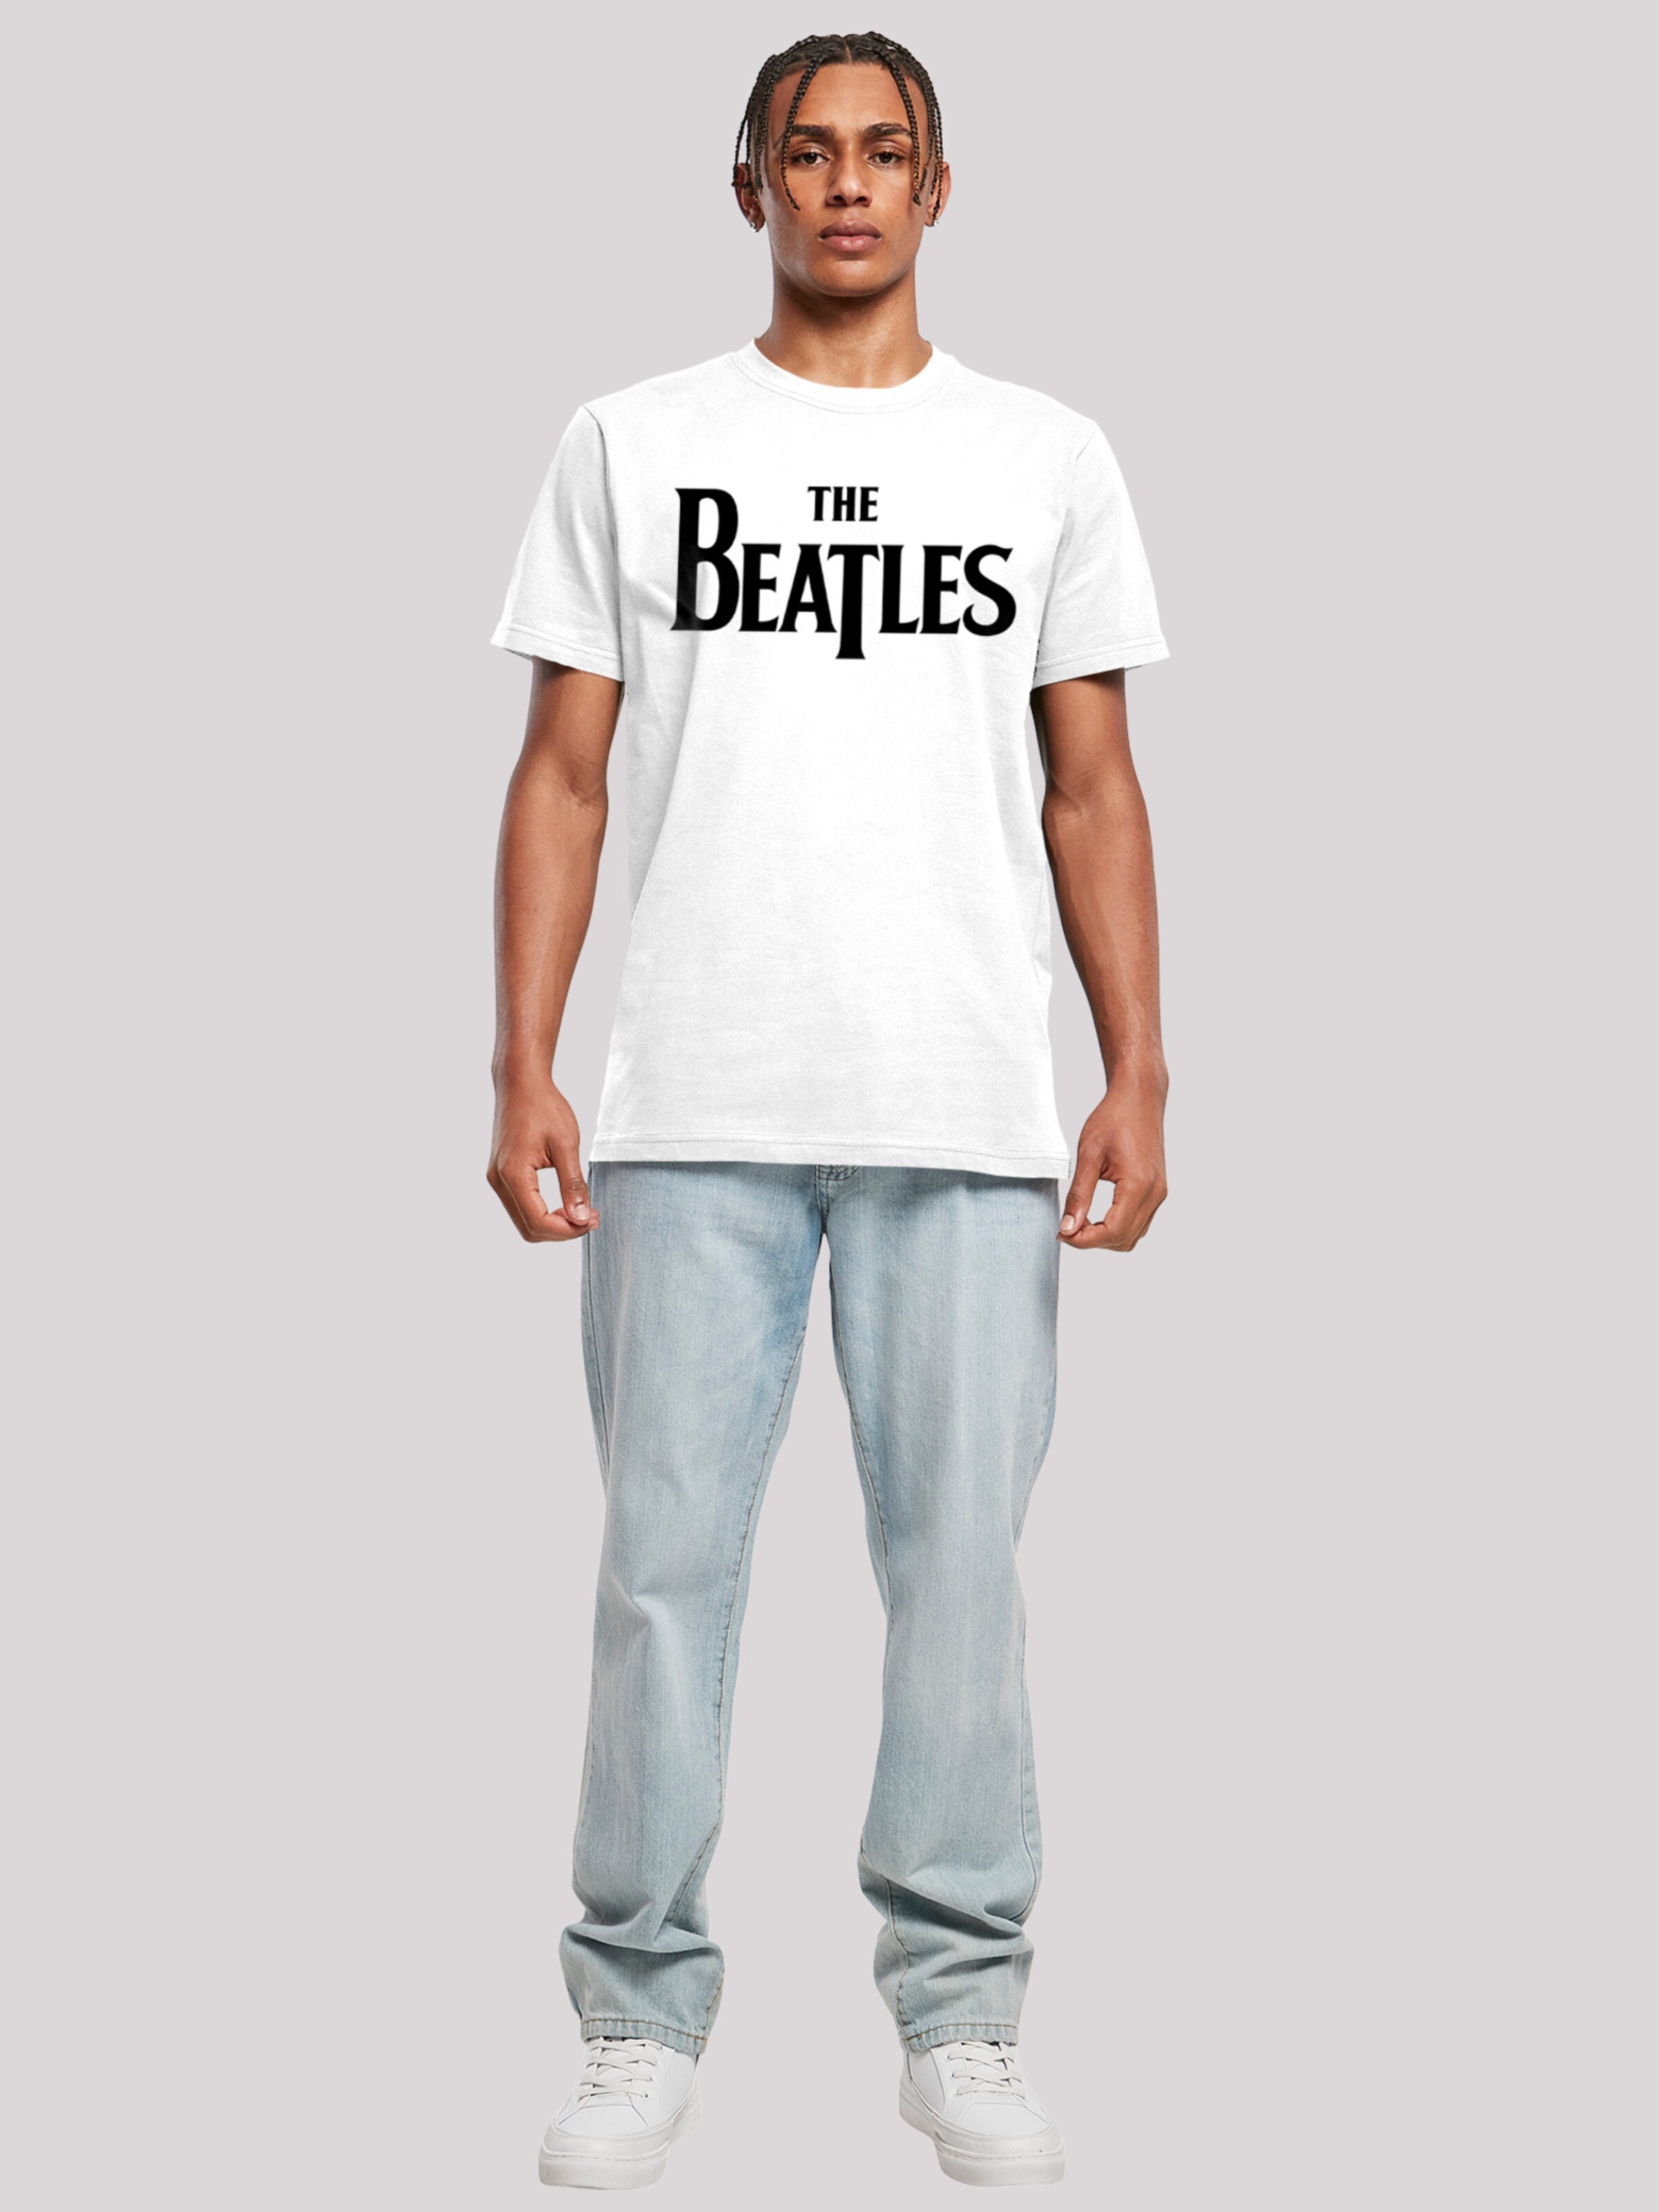 Band \'The Weiß Beatles in Logo Drop ABOUT T YOU | F4NT4STIC Shirt Black\'